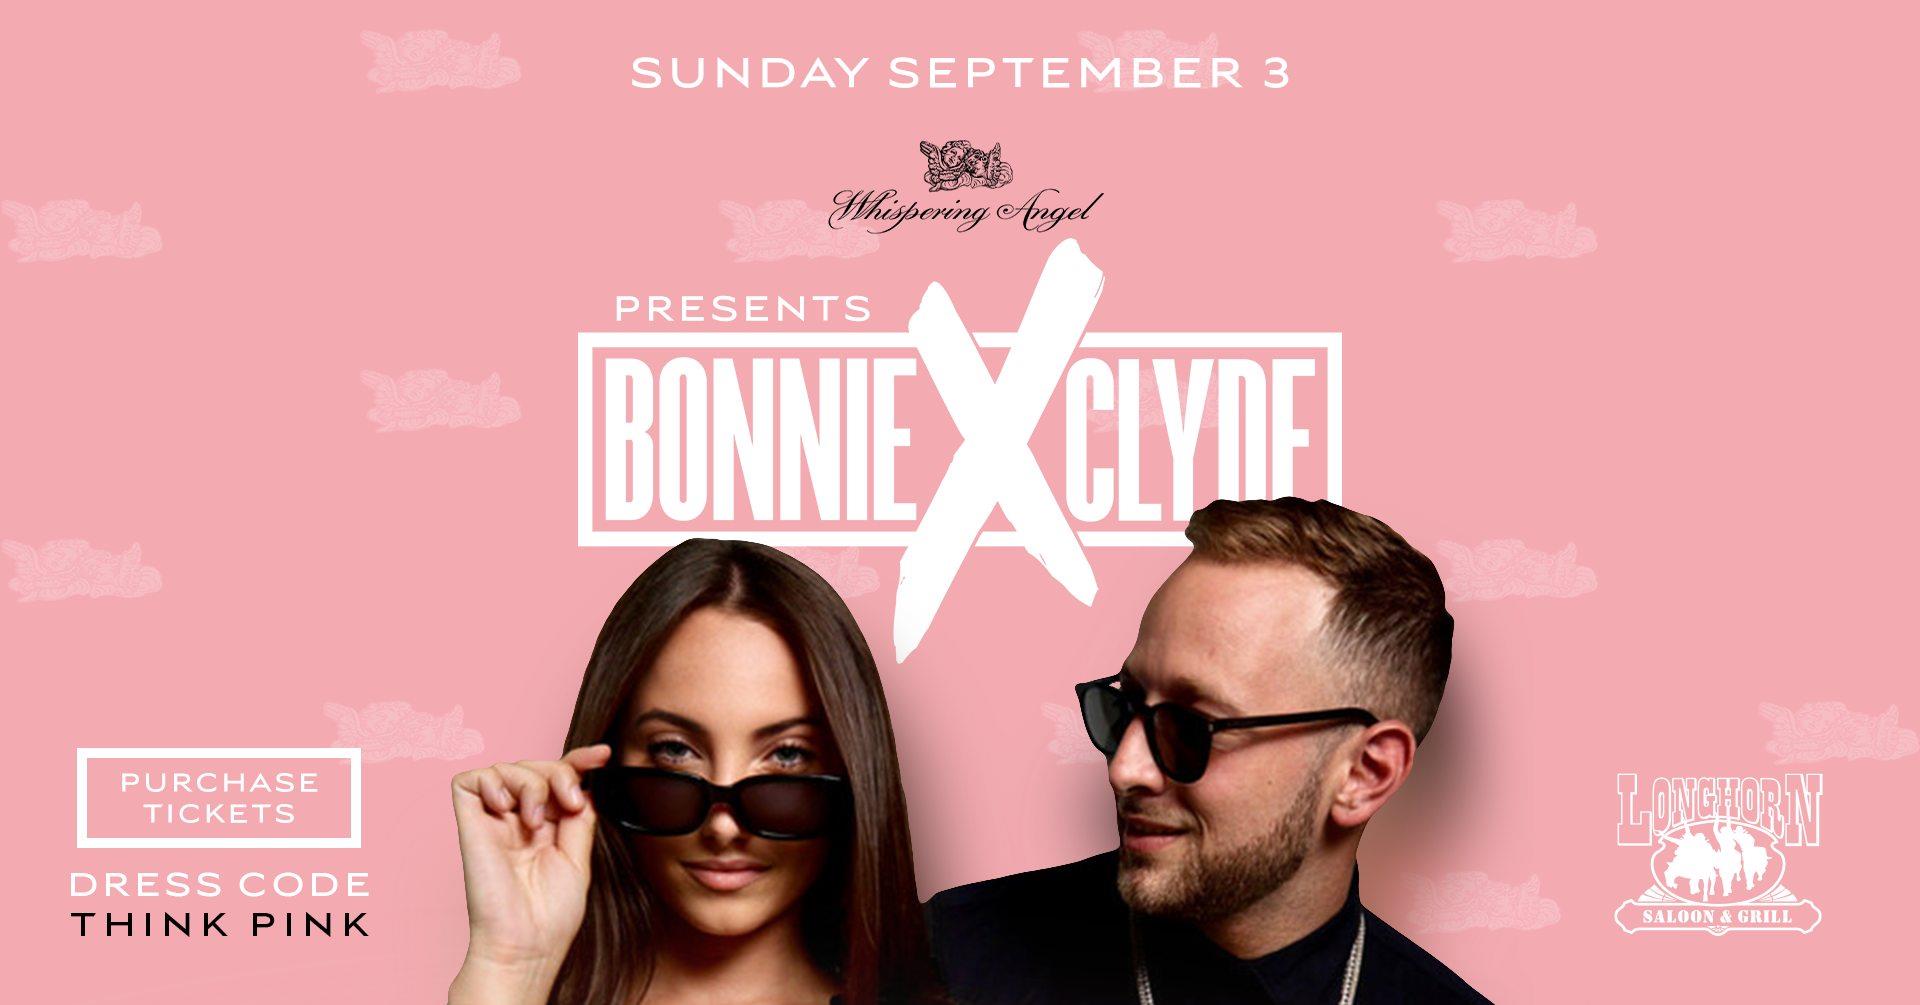 Whispering Angel presents Bonnie X Clyde